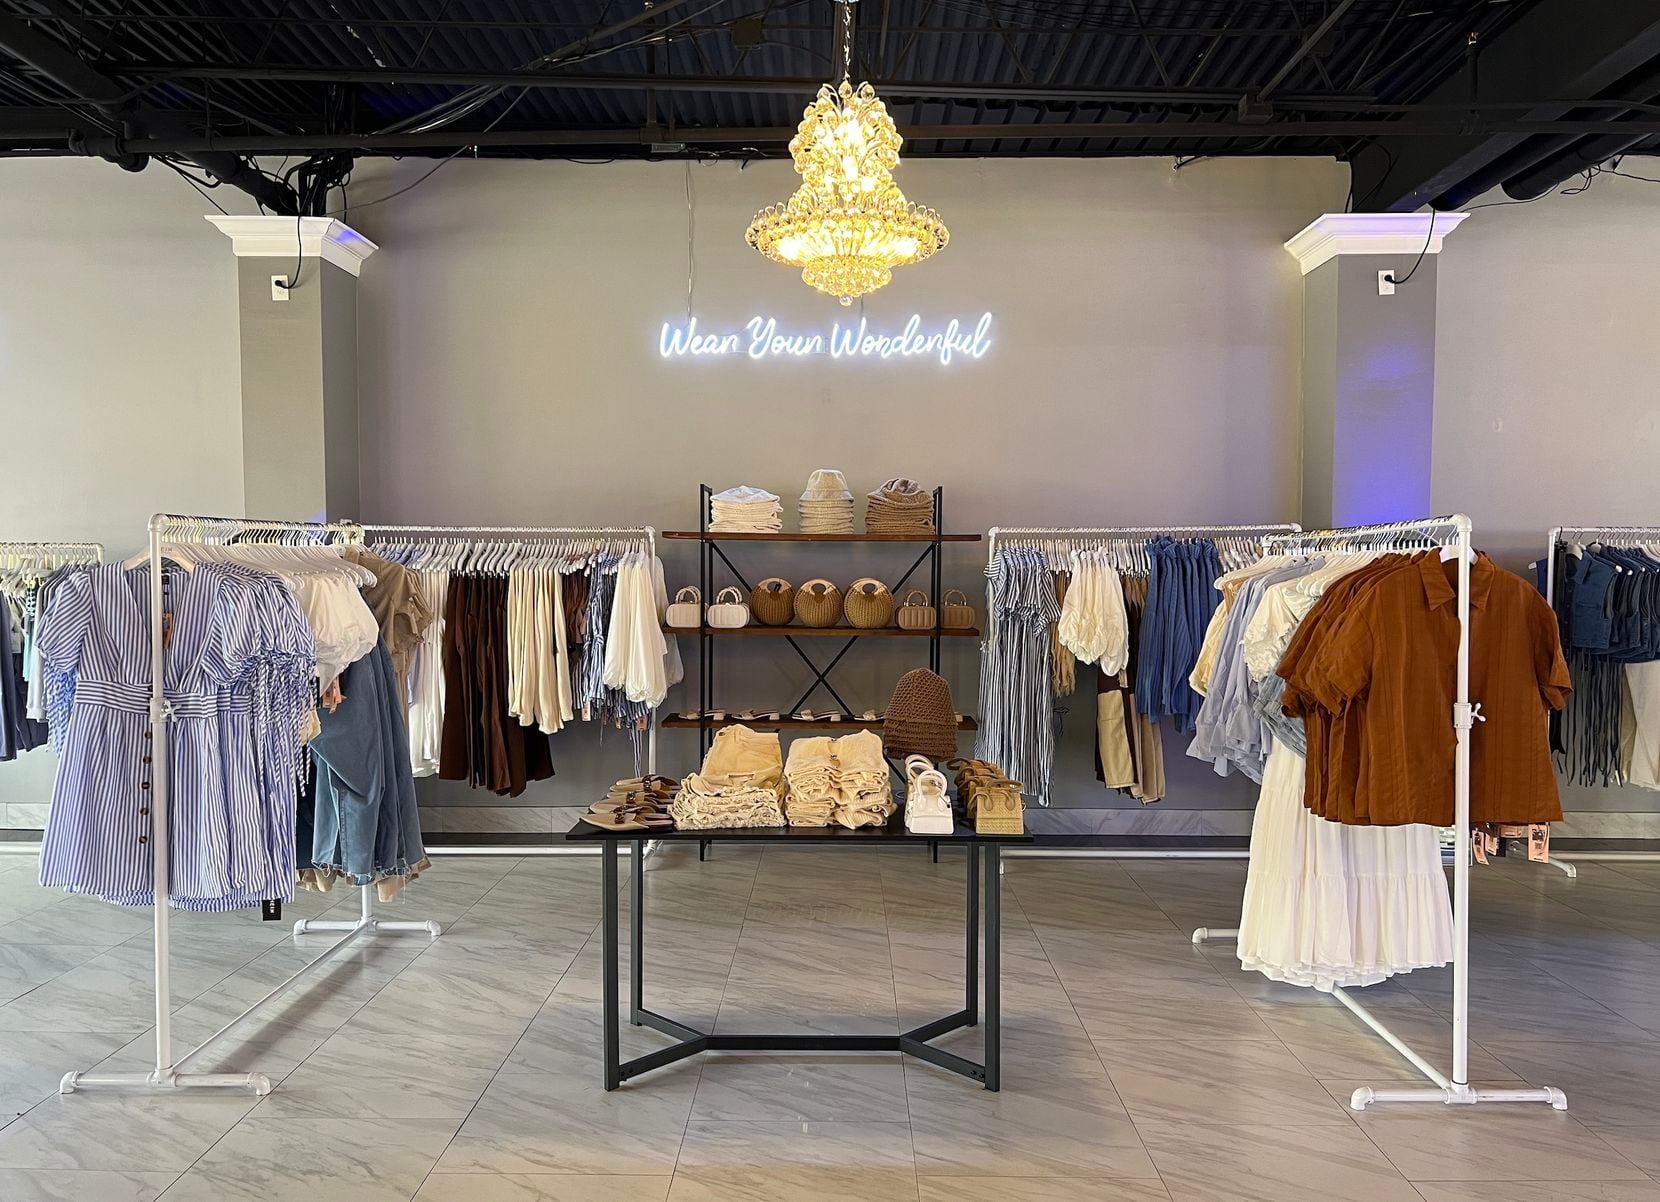 Fashion retailer Shein announces pop-up shop at Plano's The Shops at